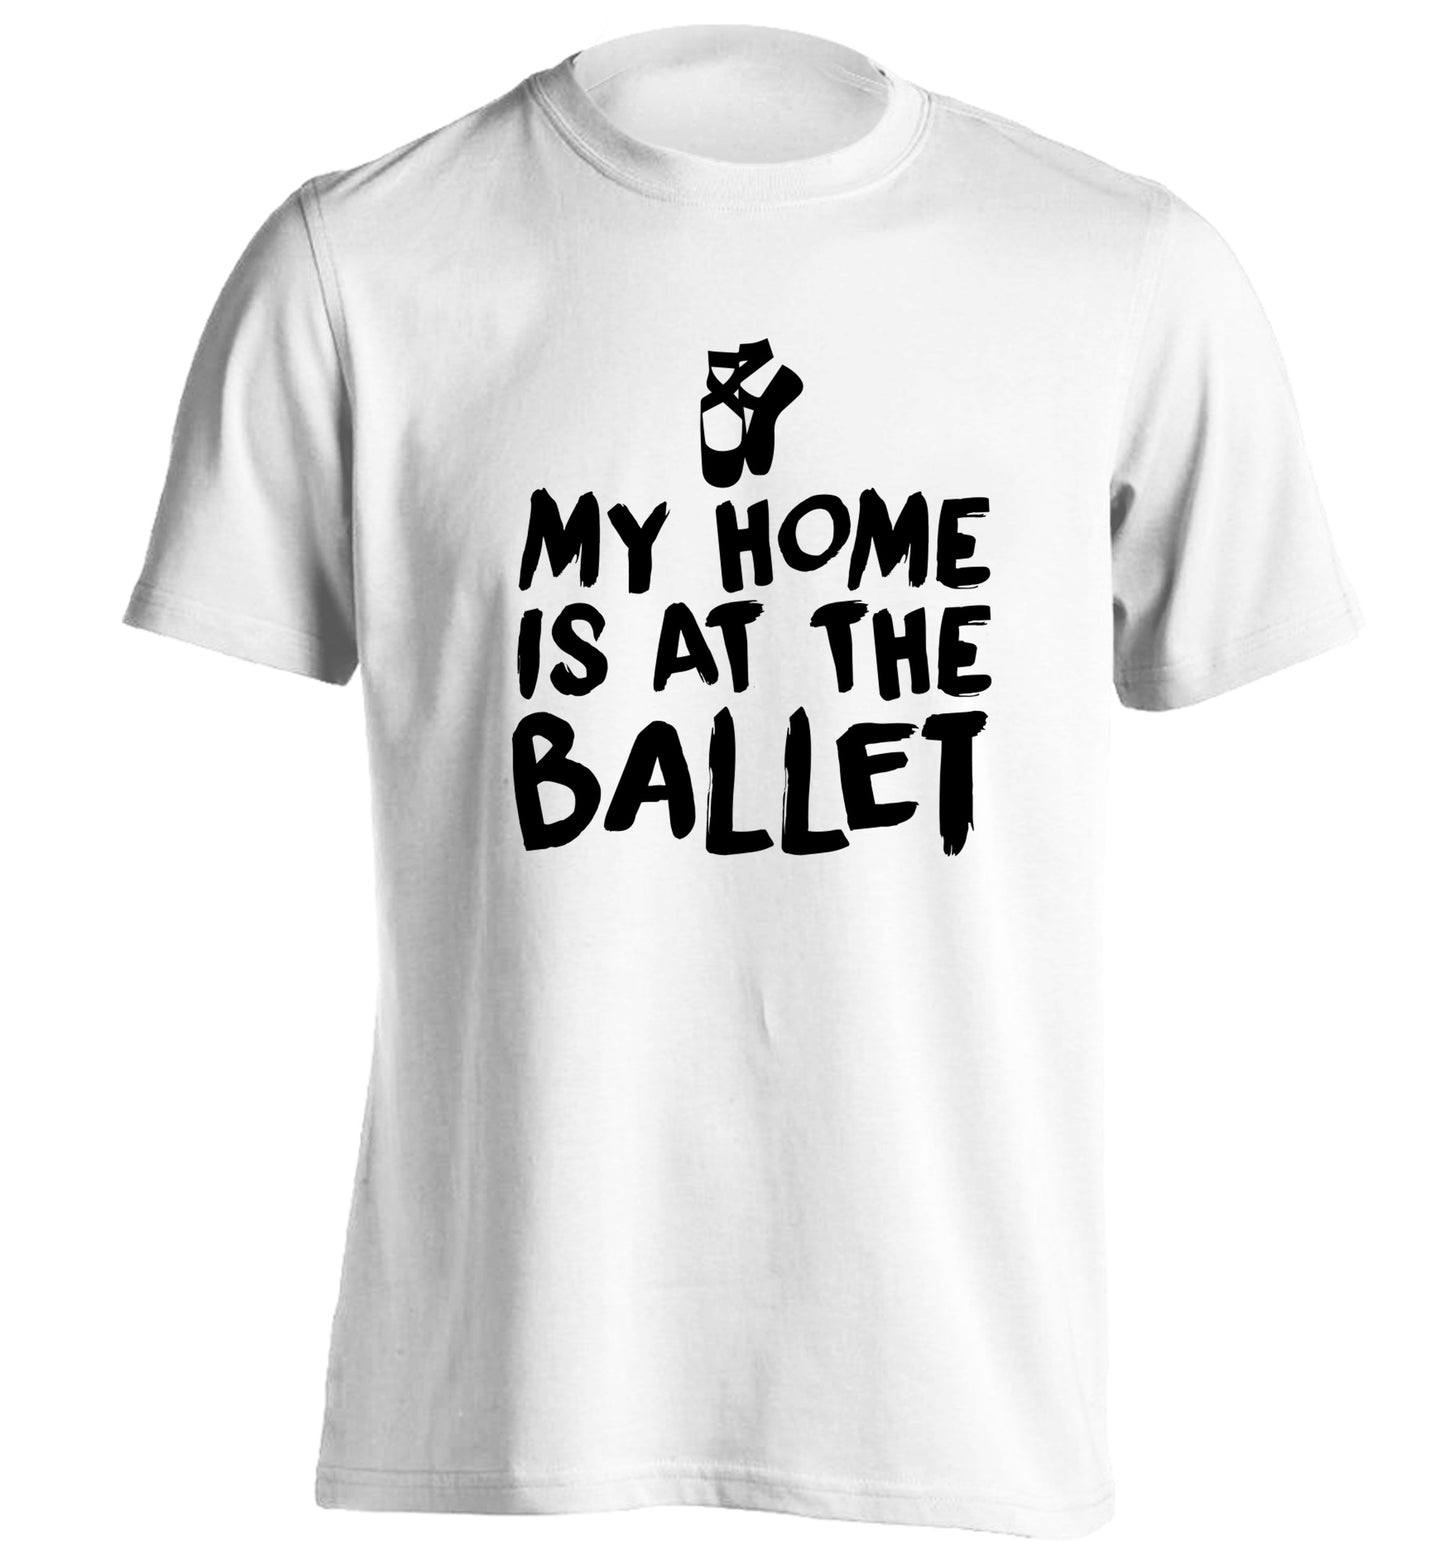 My home is at the dance studio adults unisex white Tshirt 2XL